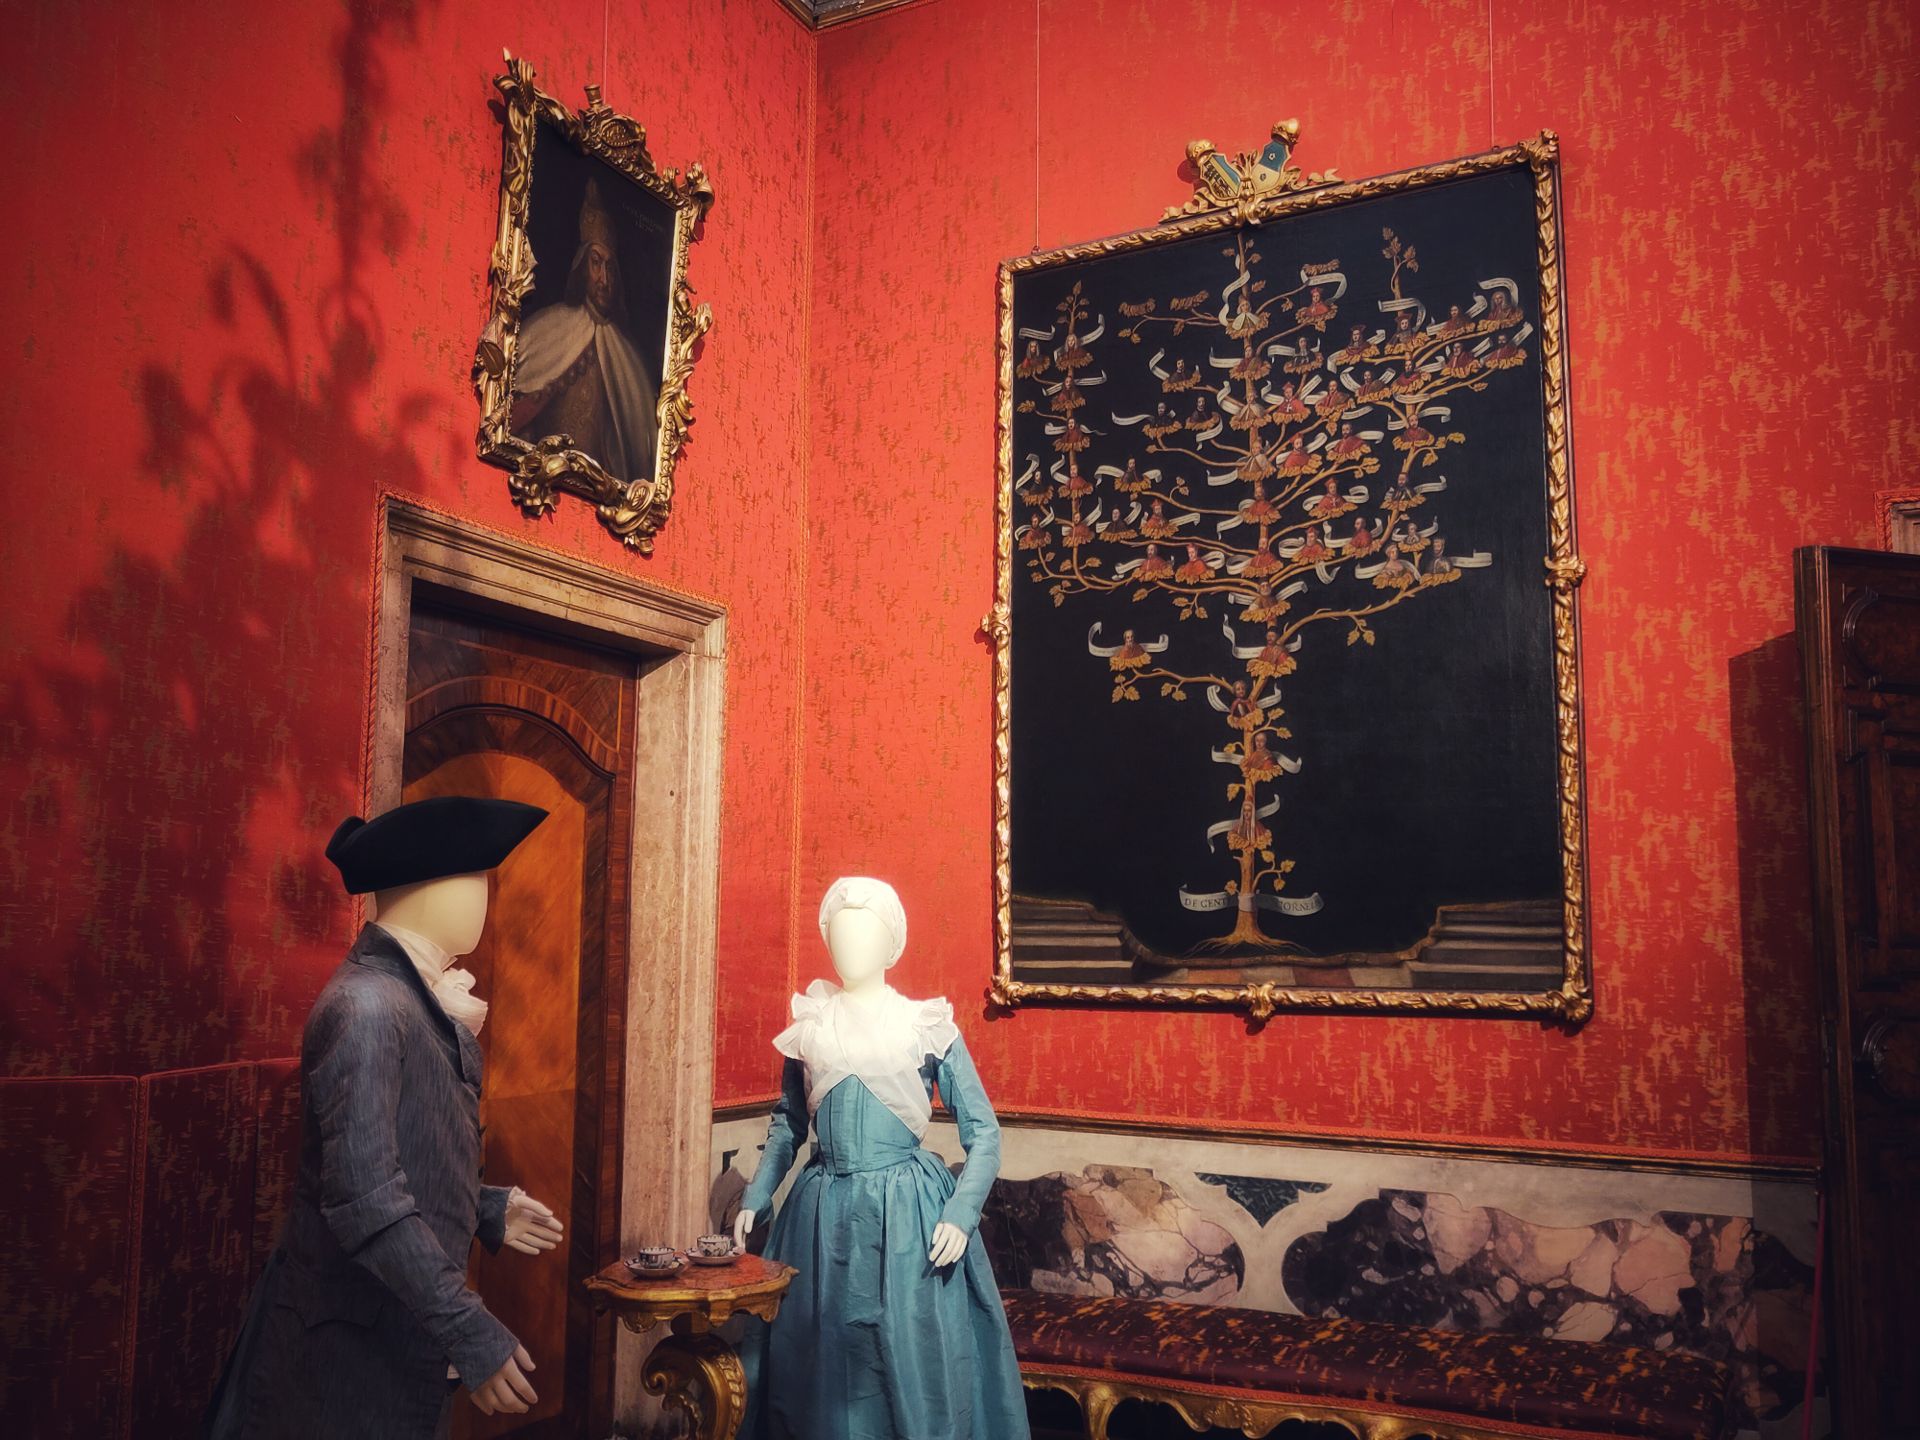 A couple of mannequins, dressed as Venetian nobles from the 18th century. The walls are very red and there's an old-school family tree on one wall.